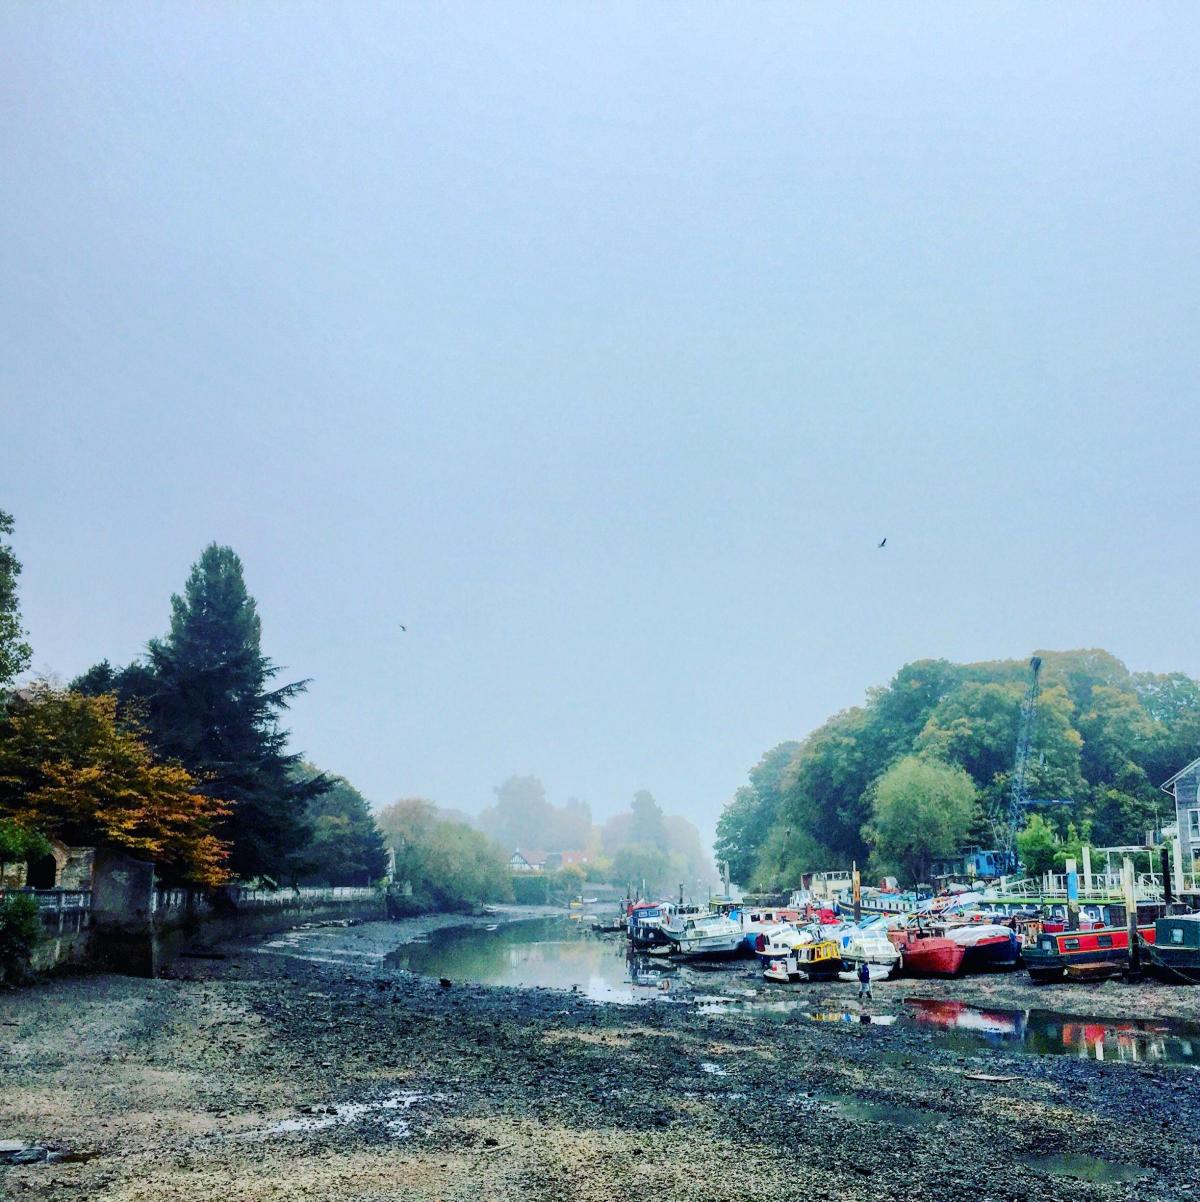 Aung Moe Khaing also snapped a photo of Twickenham riverside